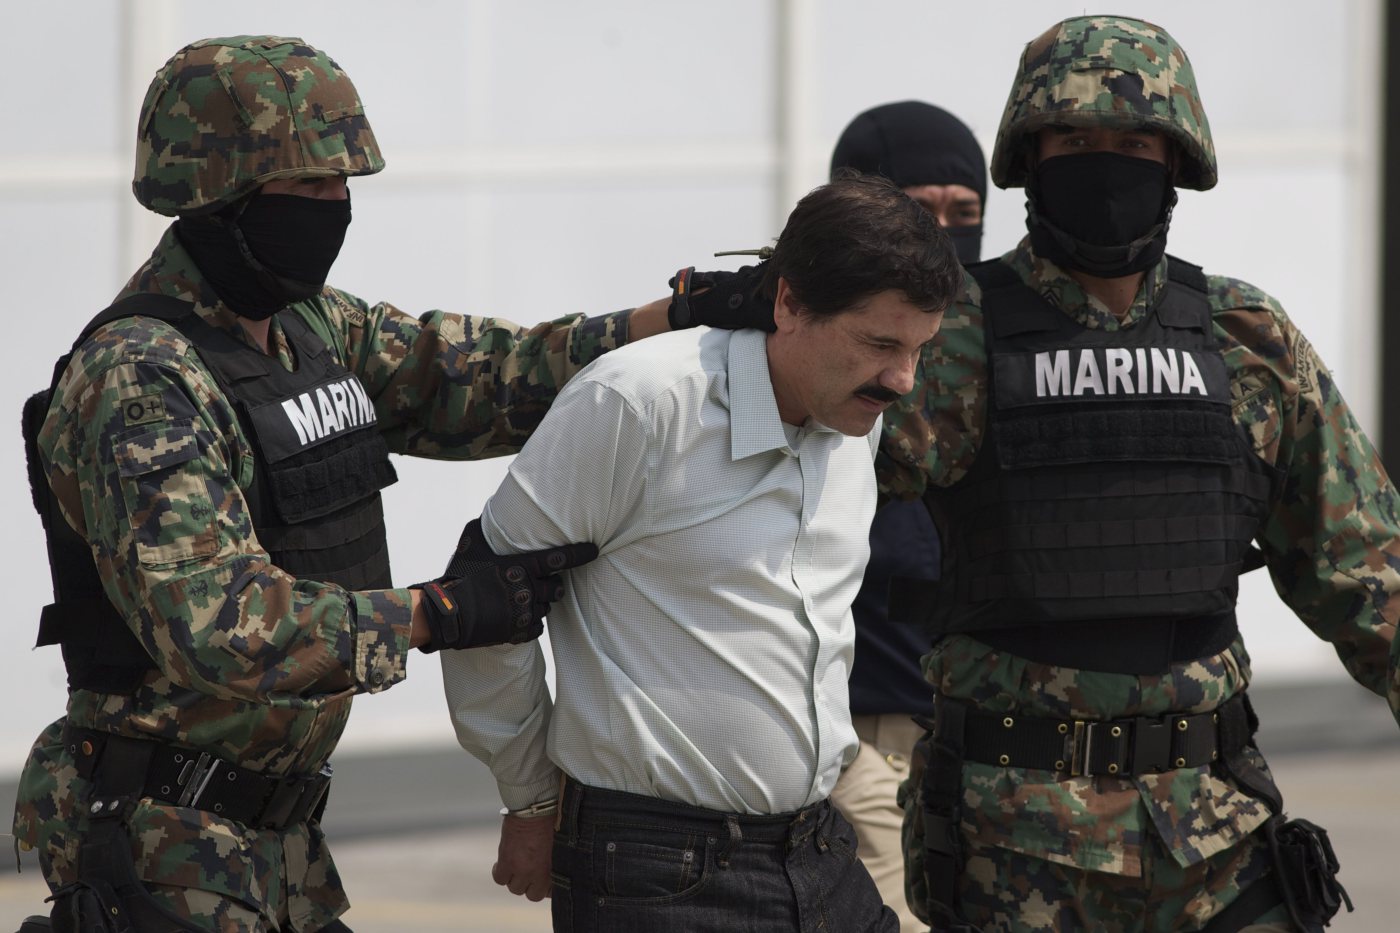 Joaquin "El Chapo" Guzman is escorted to a helicopter in handcuffs by Mexican marines at a navy hanger in Mexico City, on Feb. 22, 2014. (Eduardo Verdugo&mdash;AP)